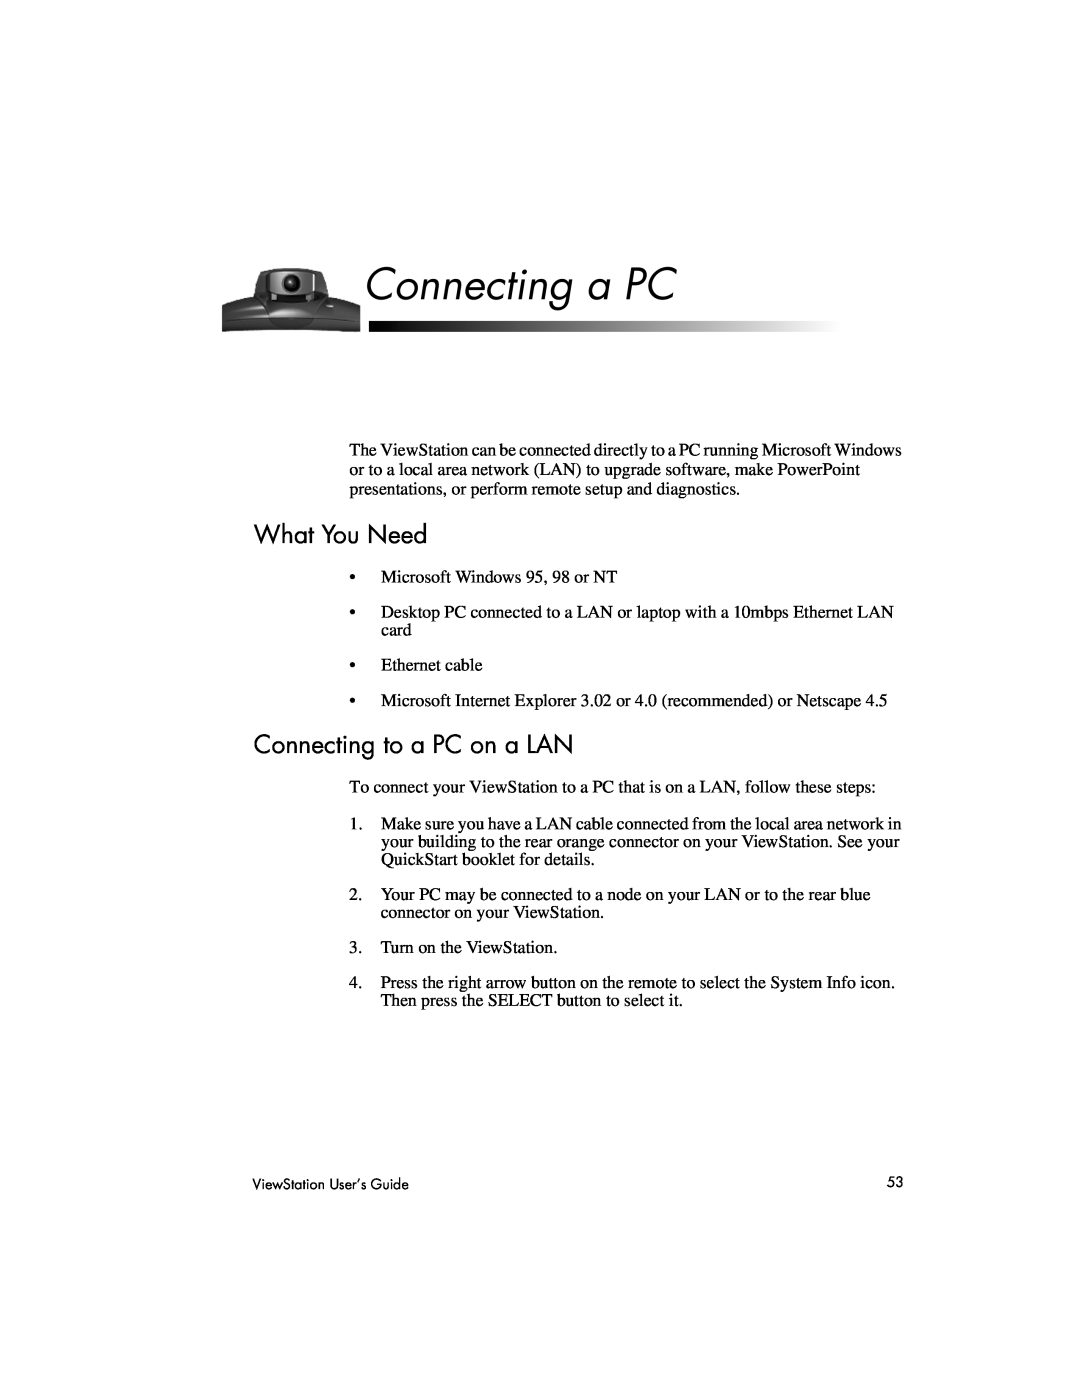 Polycom MP, 128, 512 manual Connecting a PC, What You Need, Connecting to a PC on a LAN 